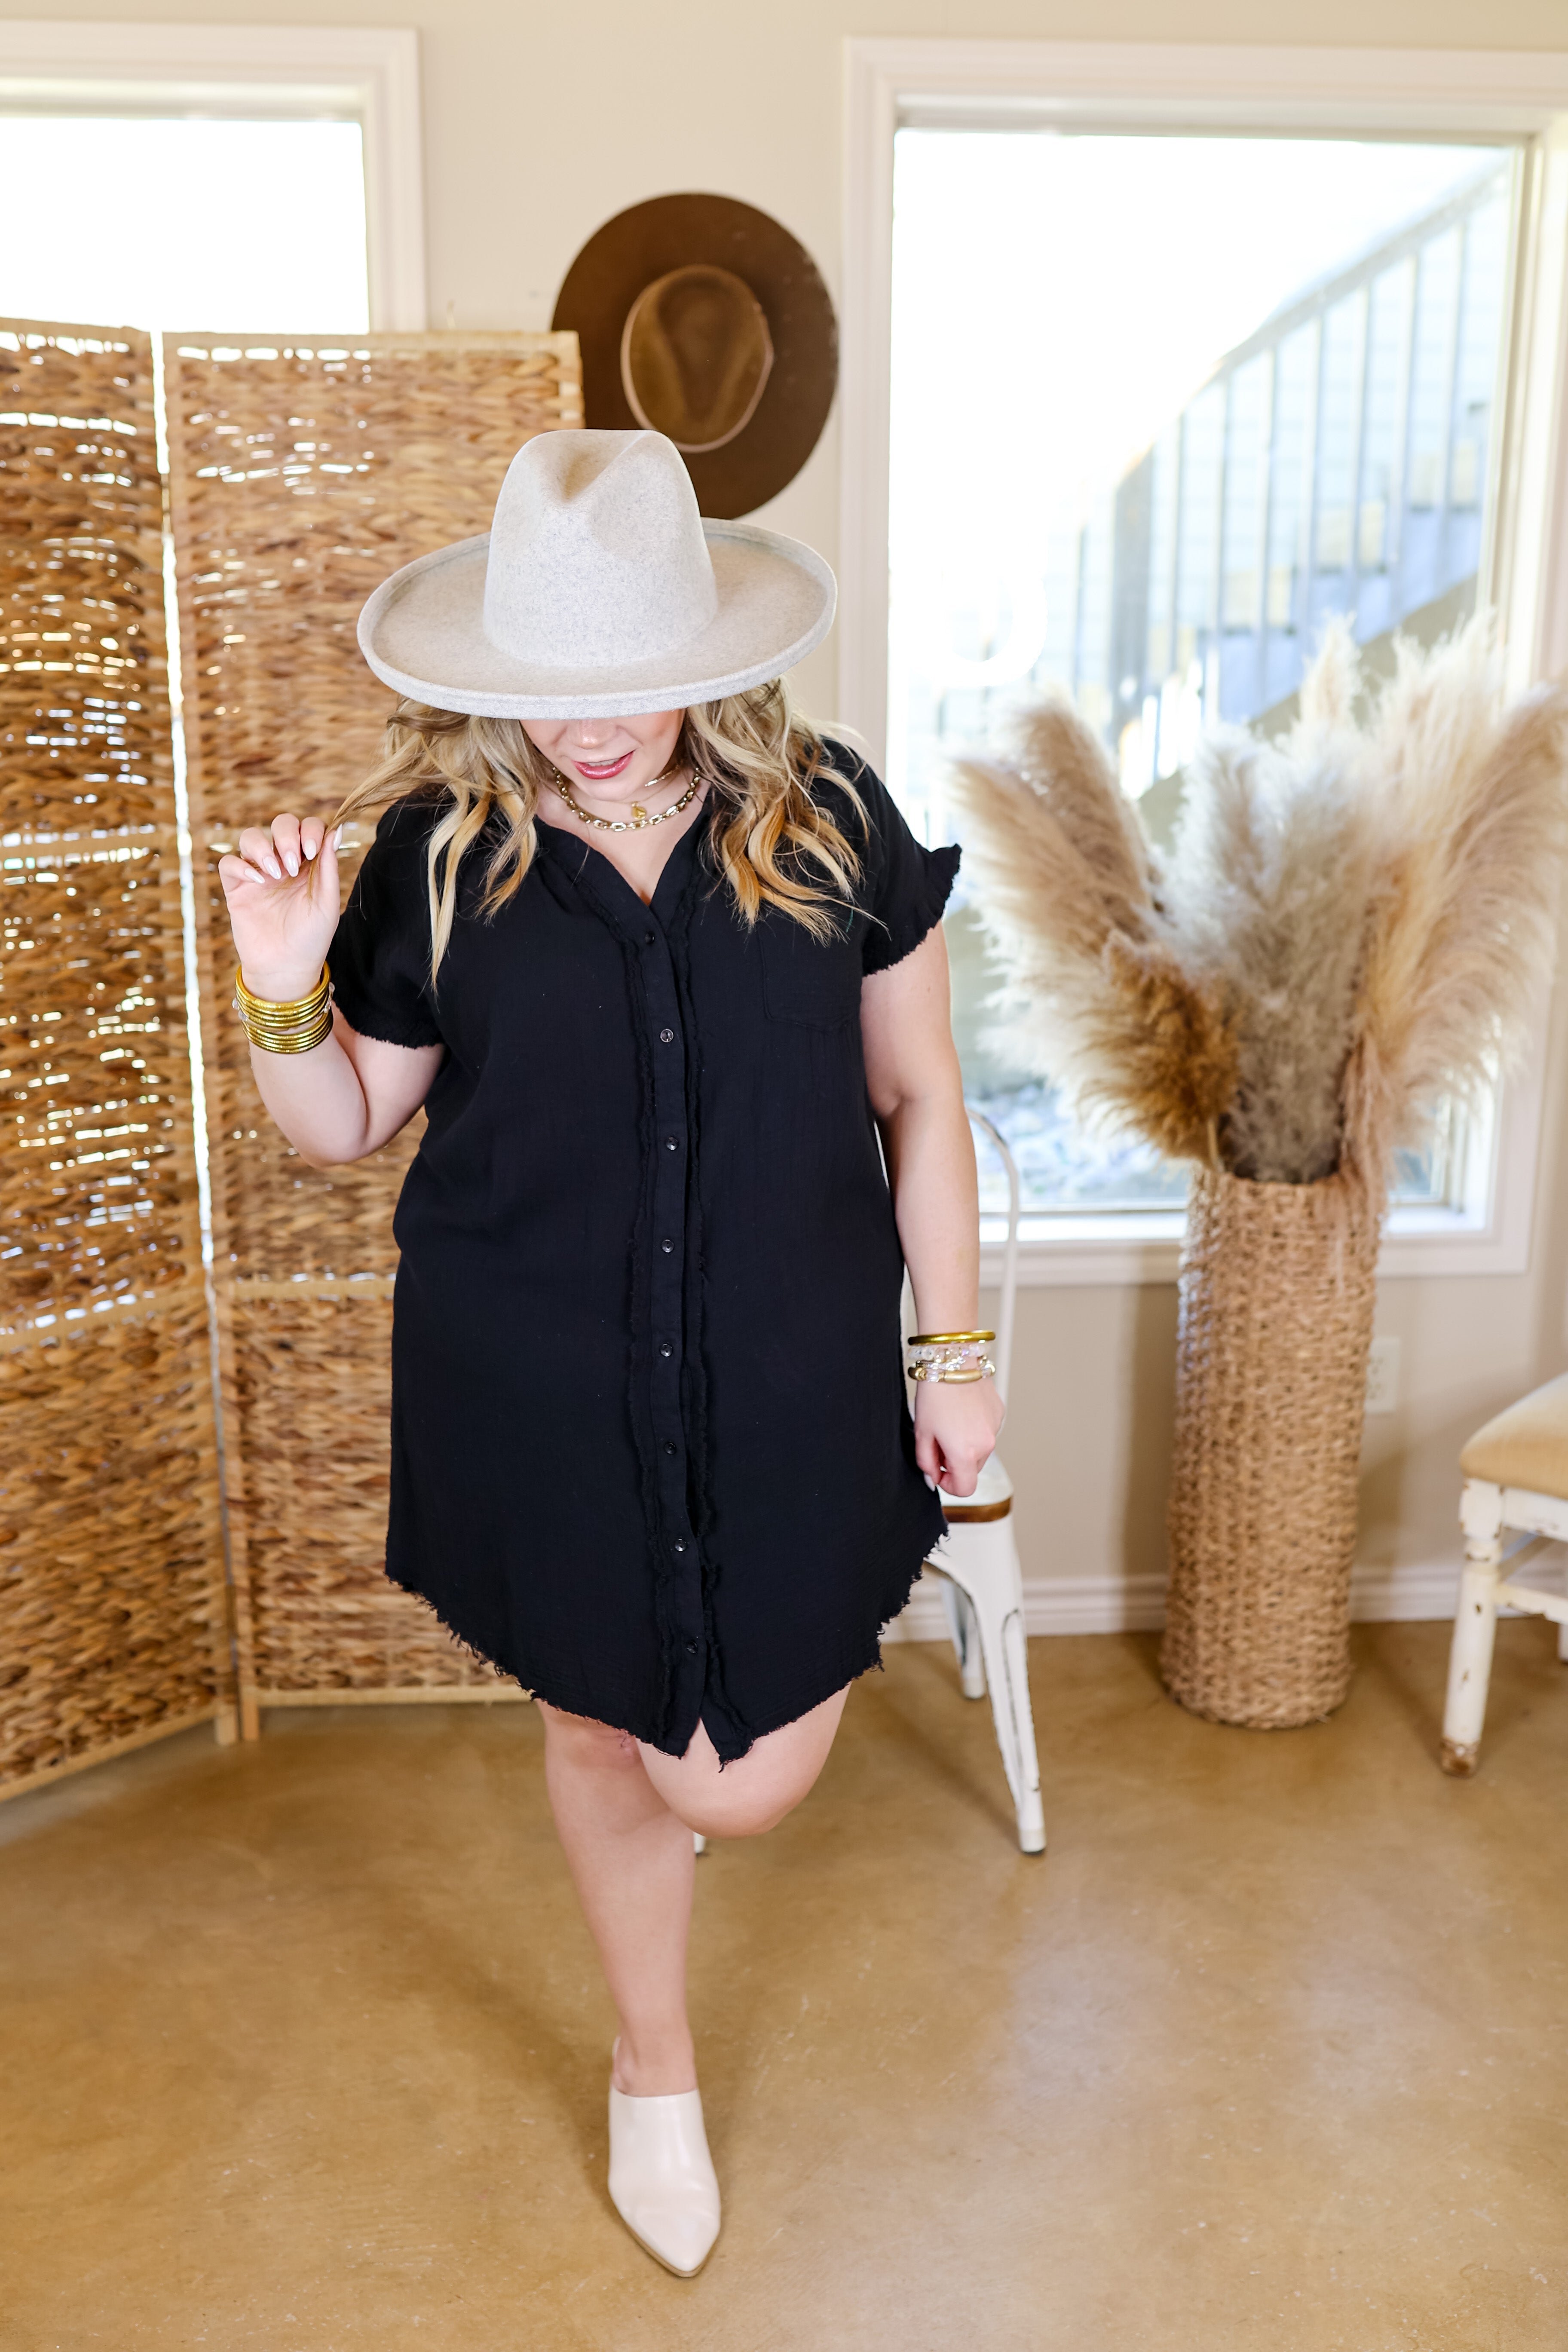 Spring Glow Button Up Raw Hem Dress in Black - Giddy Up Glamour Boutique